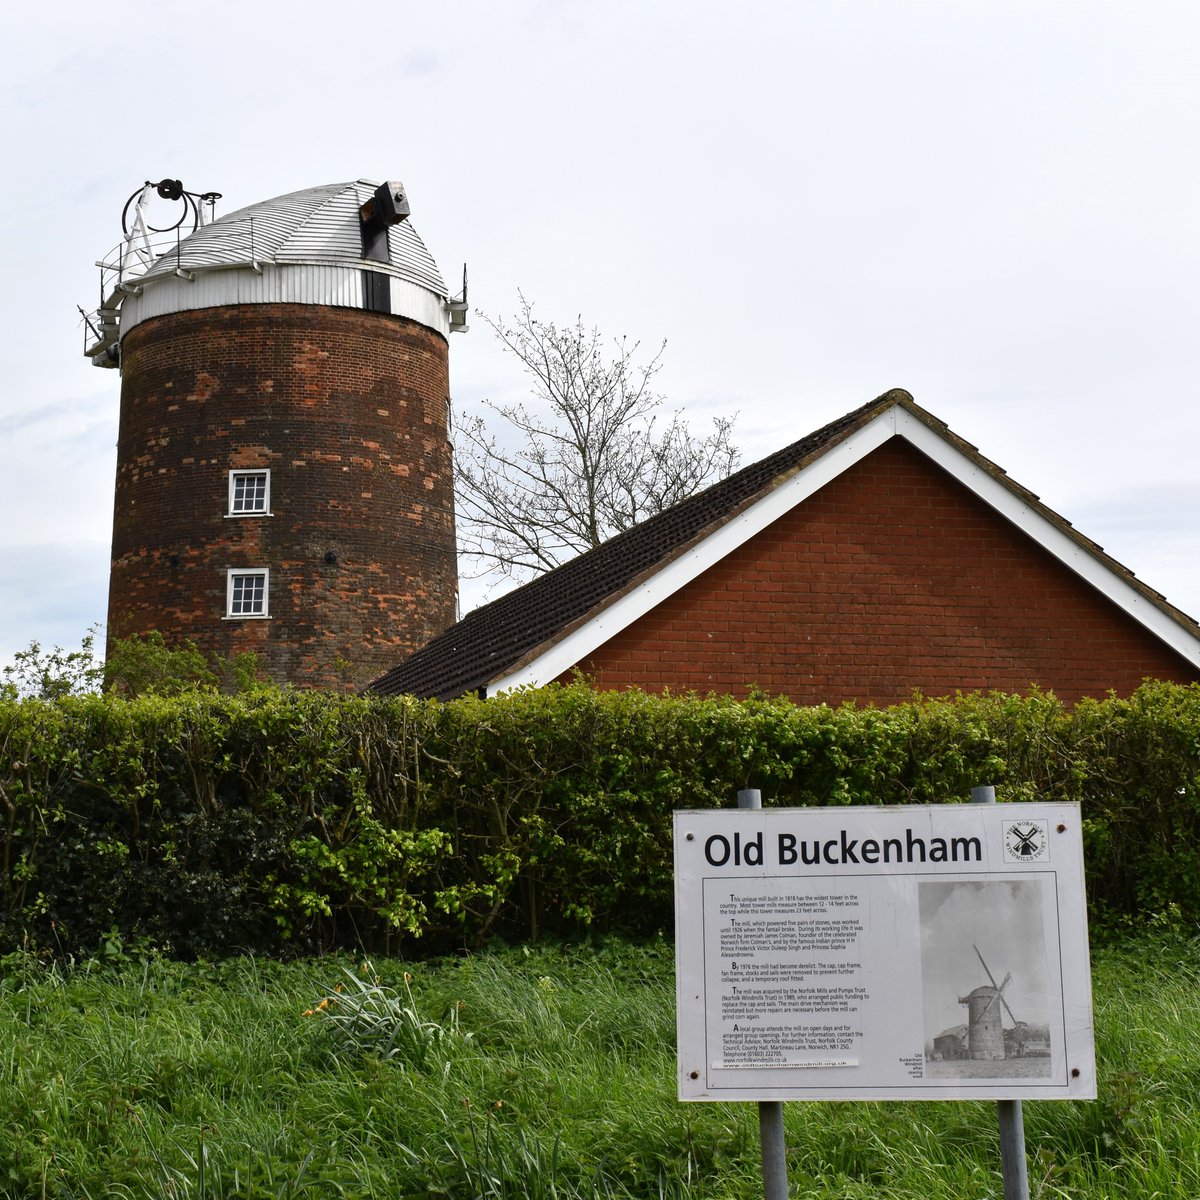 Don't forget that you promised yourself you would visit Old Buckenham Windmill this weekend! Sunday 21 April, 1pm-4pm. Guided tours - £3 per adult (accompanied children free). Tea and cakes will be served from the new tea hut. All profits support @OldBuckWindmill.